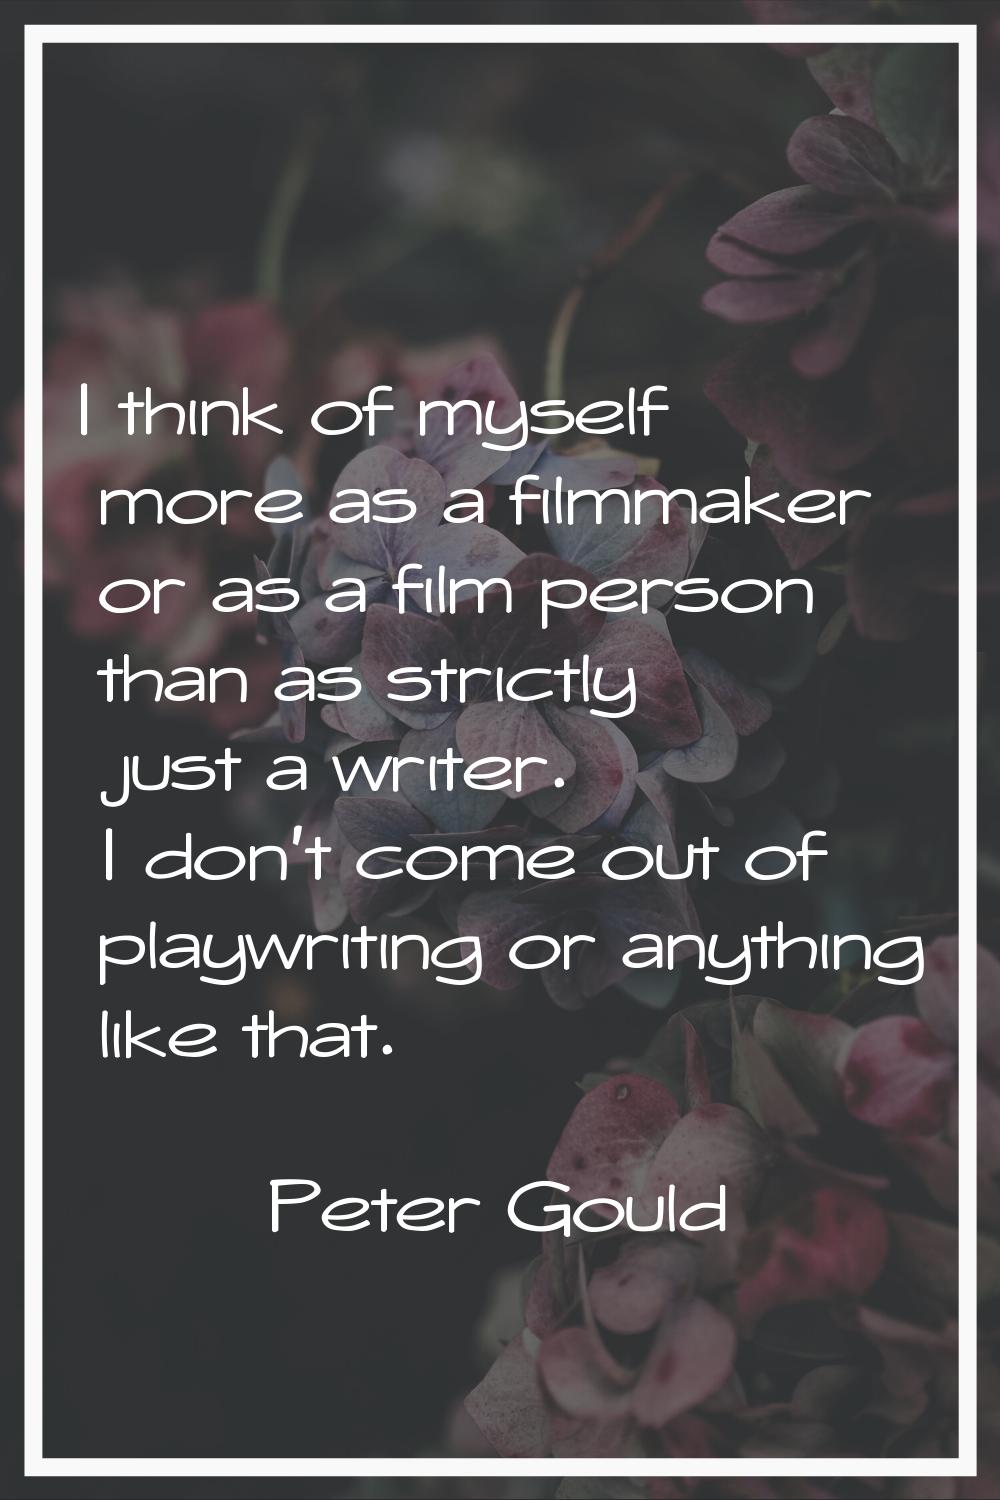 I think of myself more as a filmmaker or as a film person than as strictly just a writer. I don't c